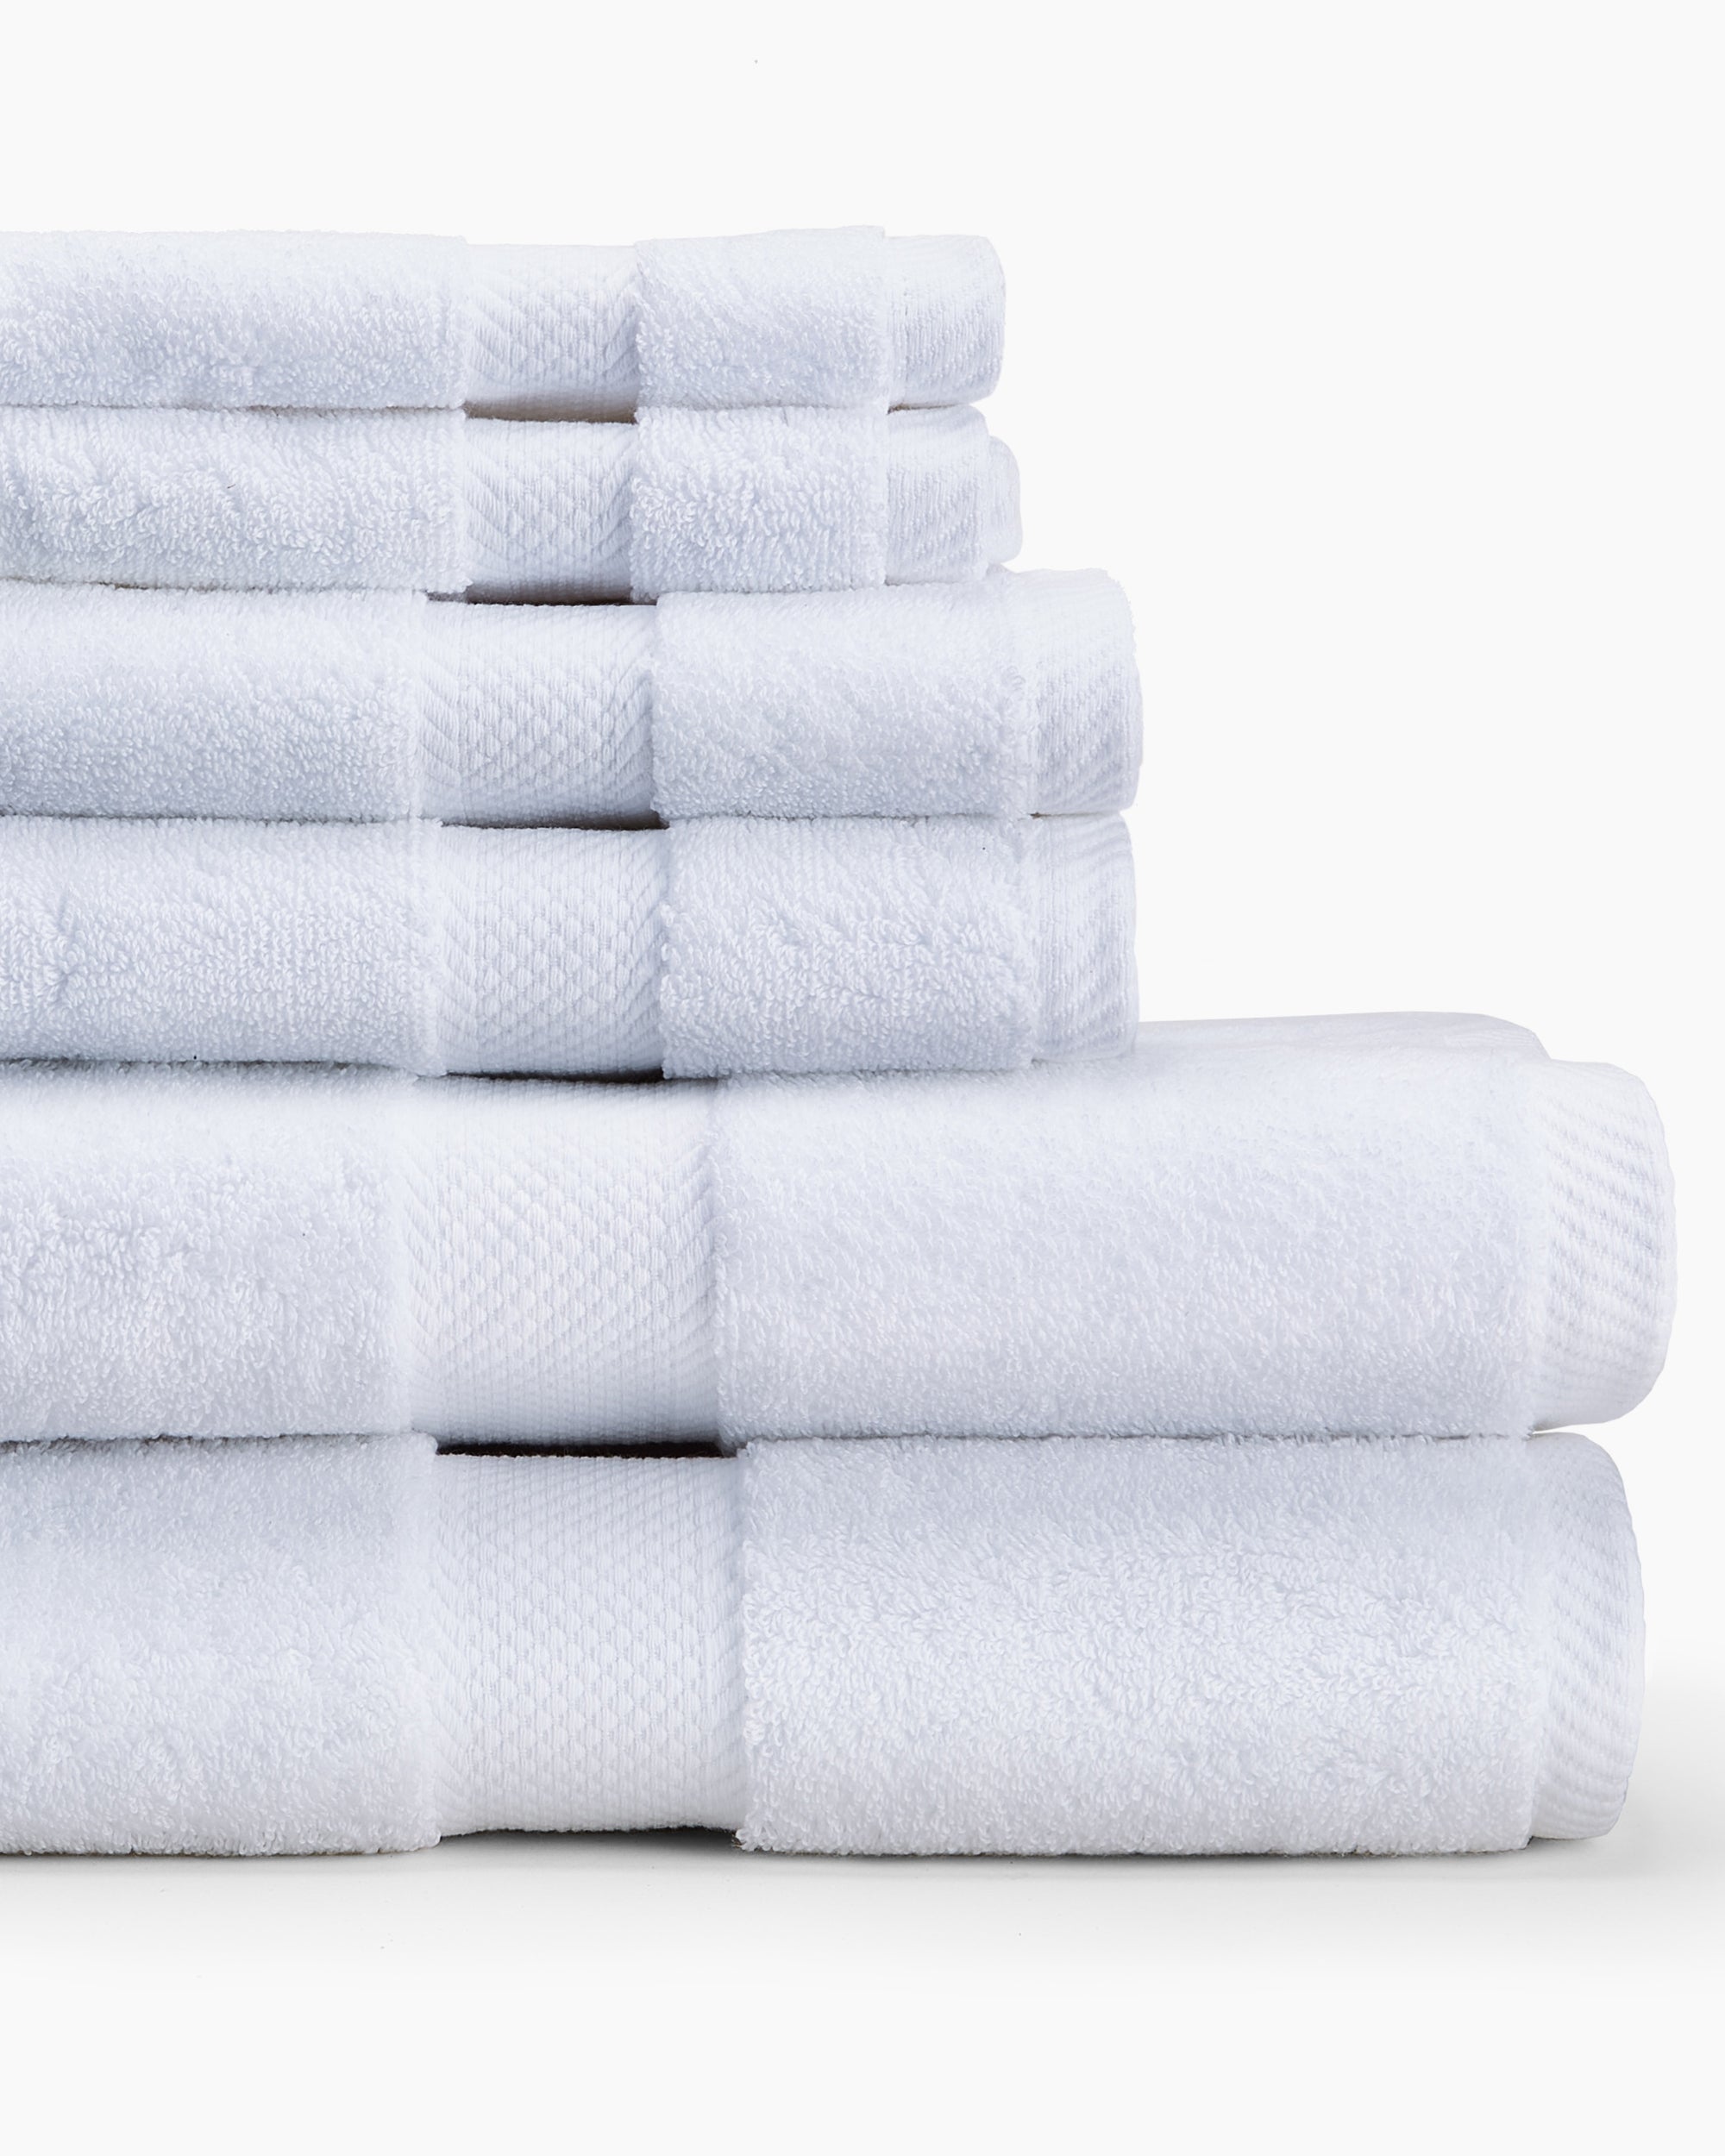 ring spun soft, plush and absorbent made in usa cotton bath towels from american made cotton